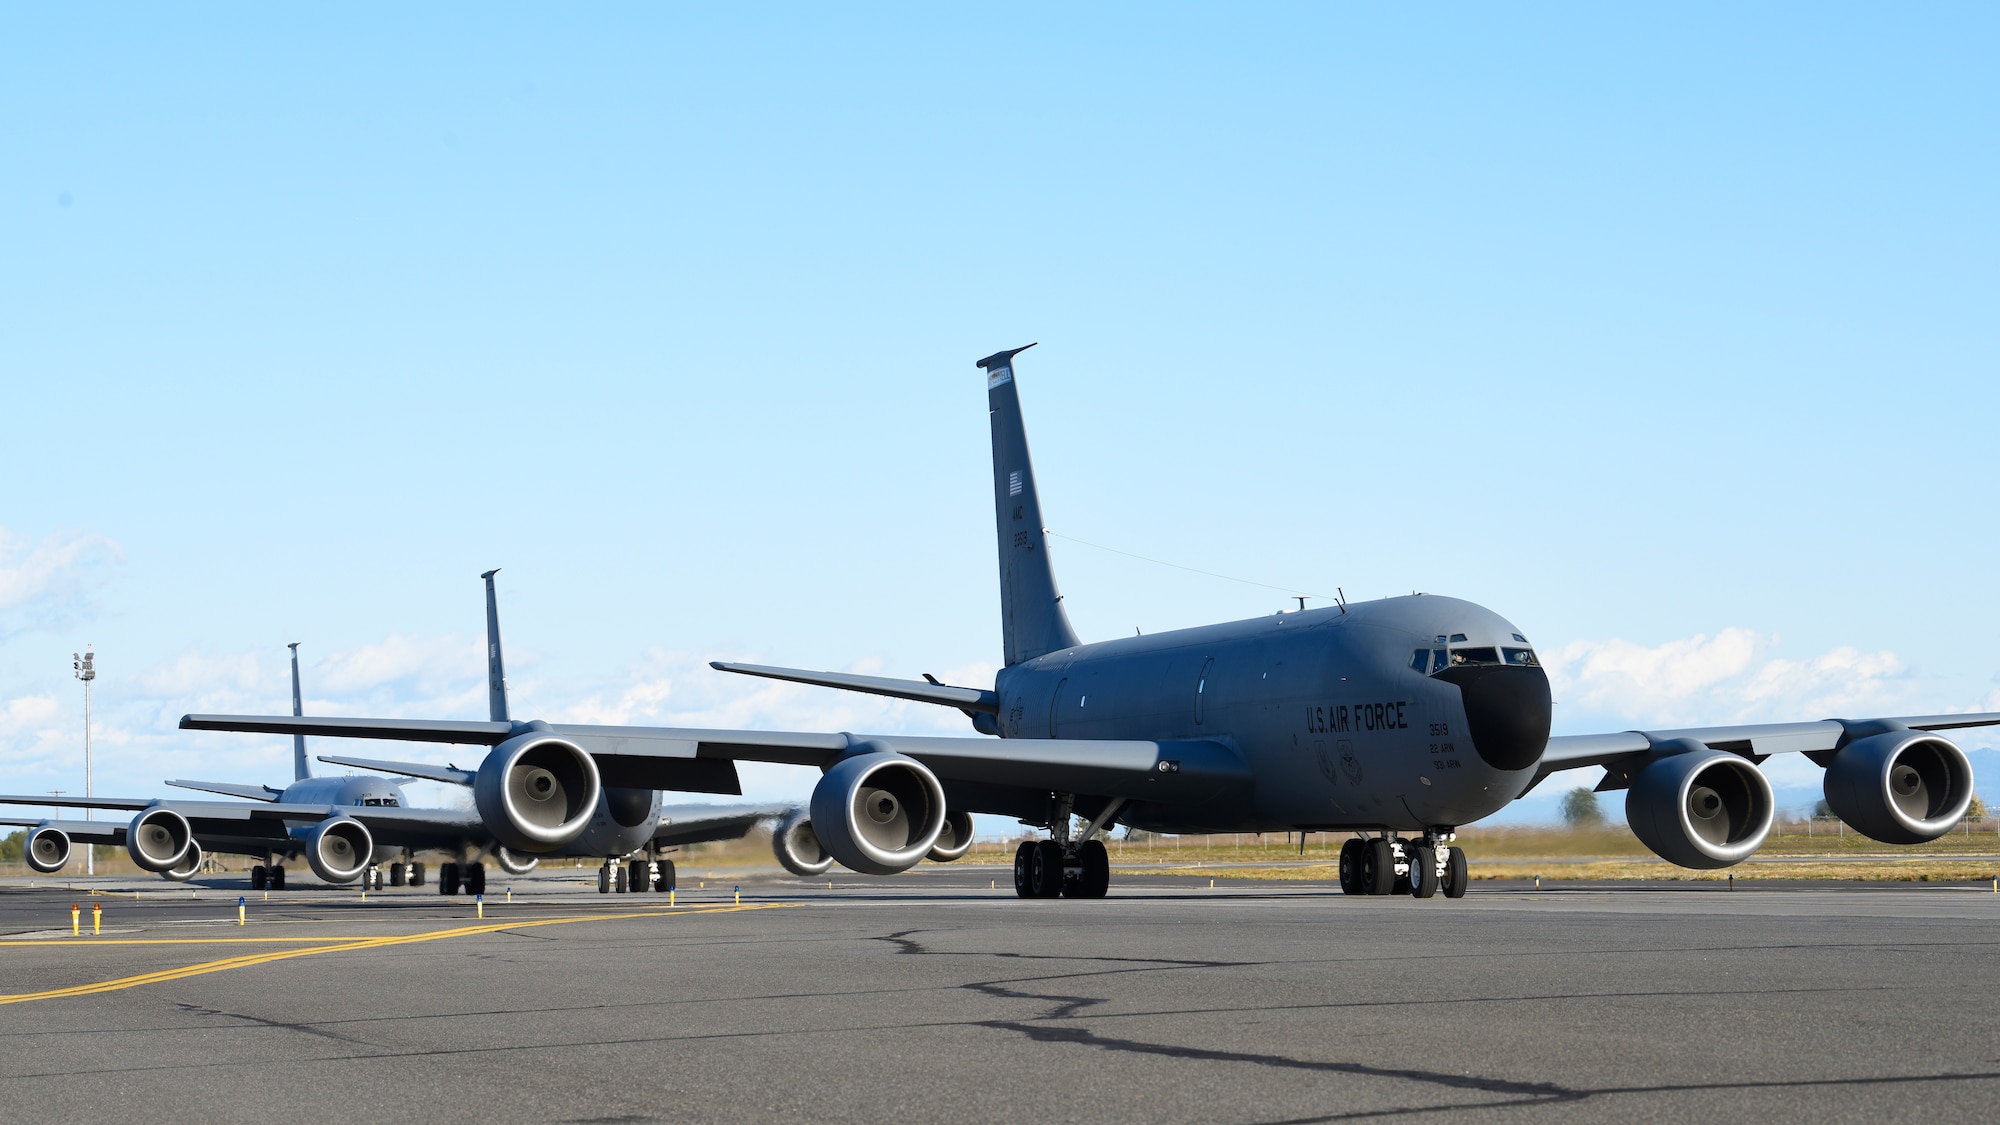 U.S. Air Force KC-135 Stratotankers taxi during a simulated alert response during Exercise Global Thunder at Fairchild Air Force Base, Washington, Oct. 22, 2019. Global Thunder is an annual command and control exercise designed to train U.S. Strategic Command forces and assess joint operational readiness. (U.S. Air Force photo by Airman 1st Class Lawrence Sena)